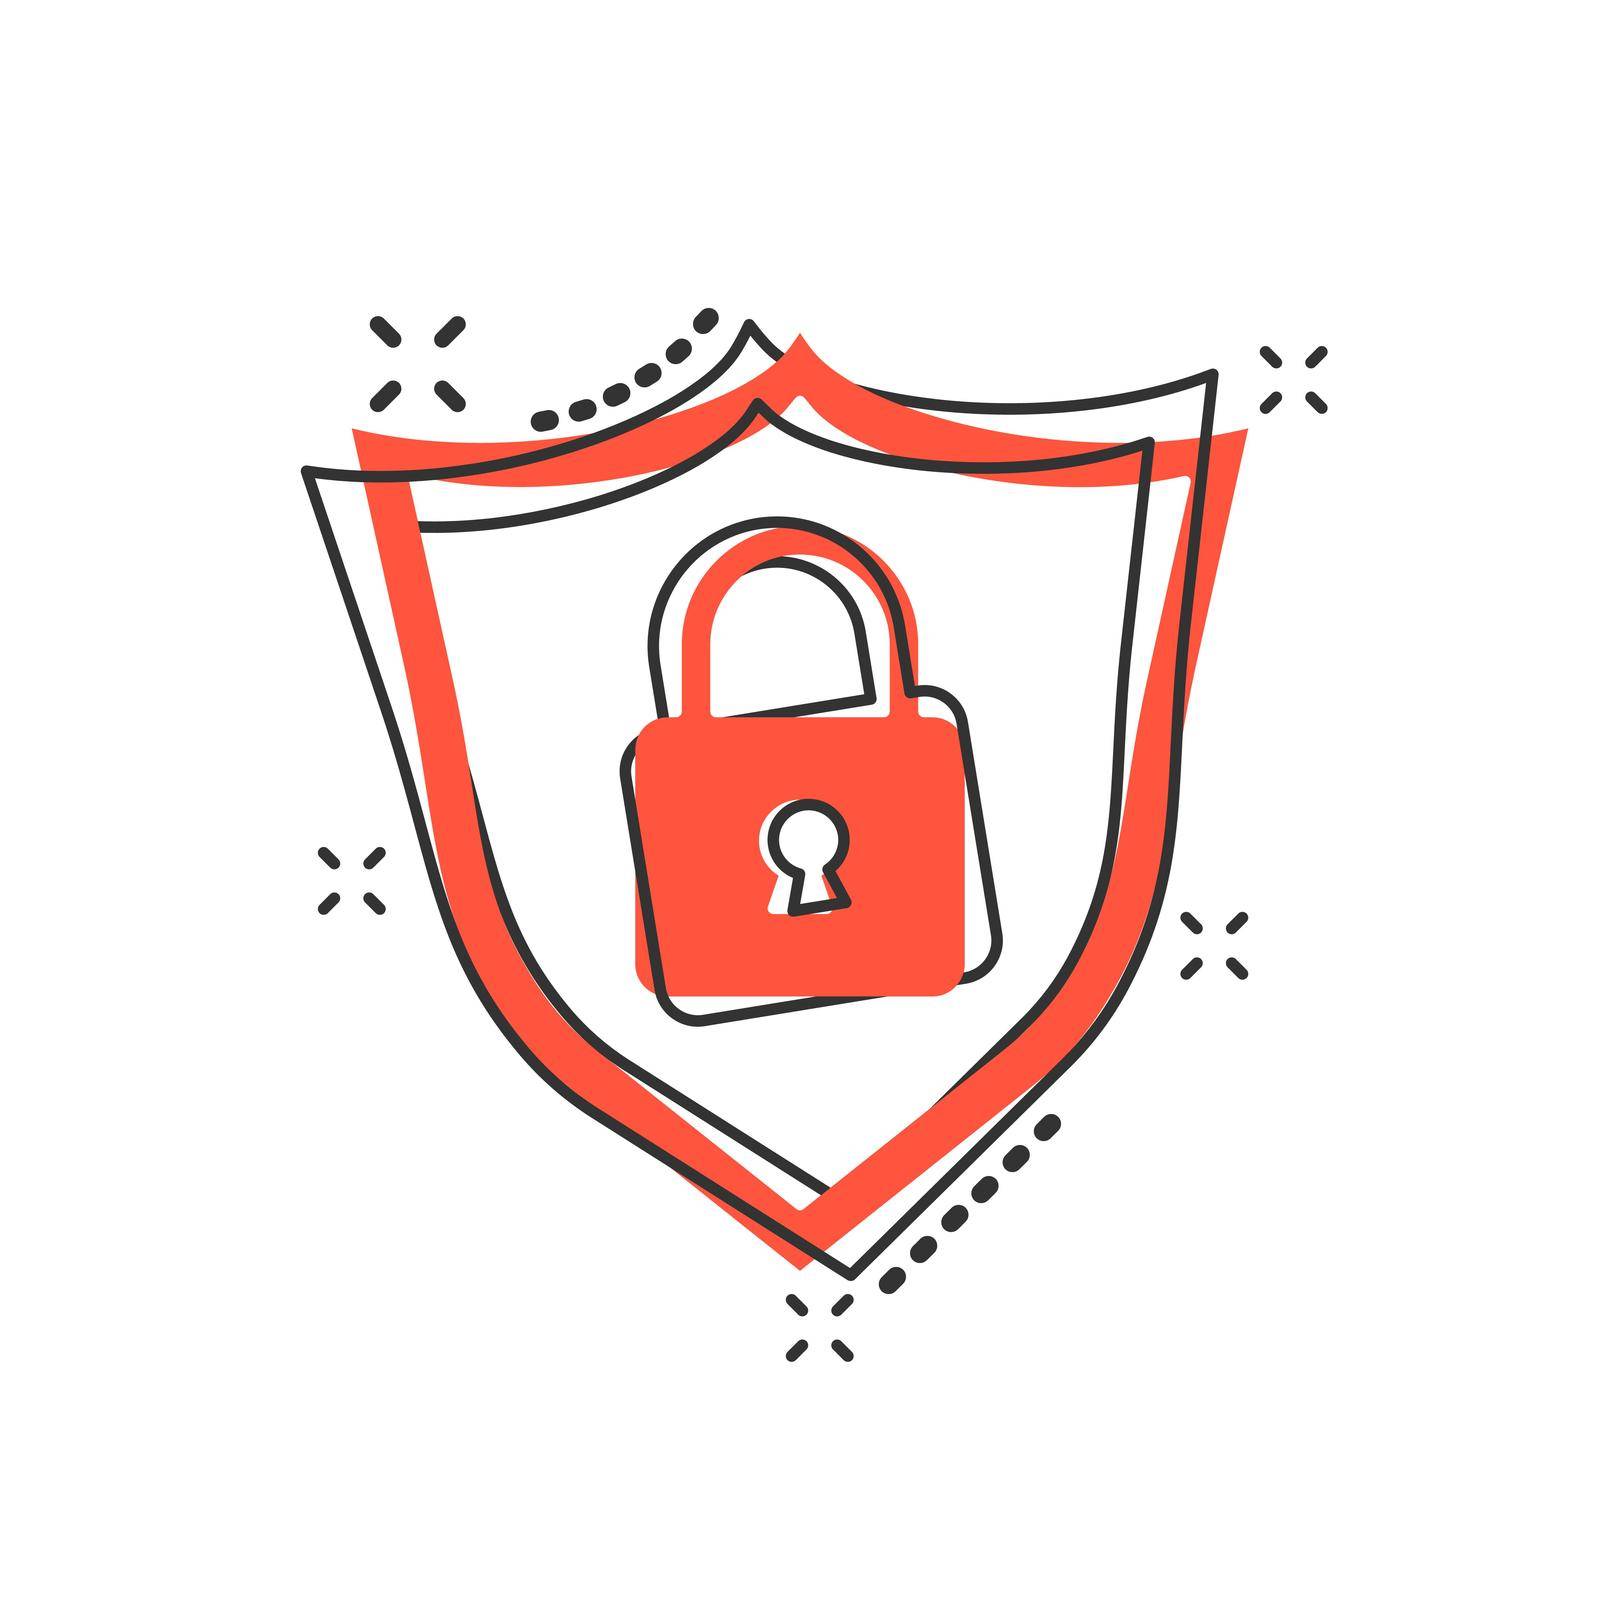 Vector cartoon lock with shield security icon in comic style. Padlock sign illustration pictogram. Shield business splash effect concept.